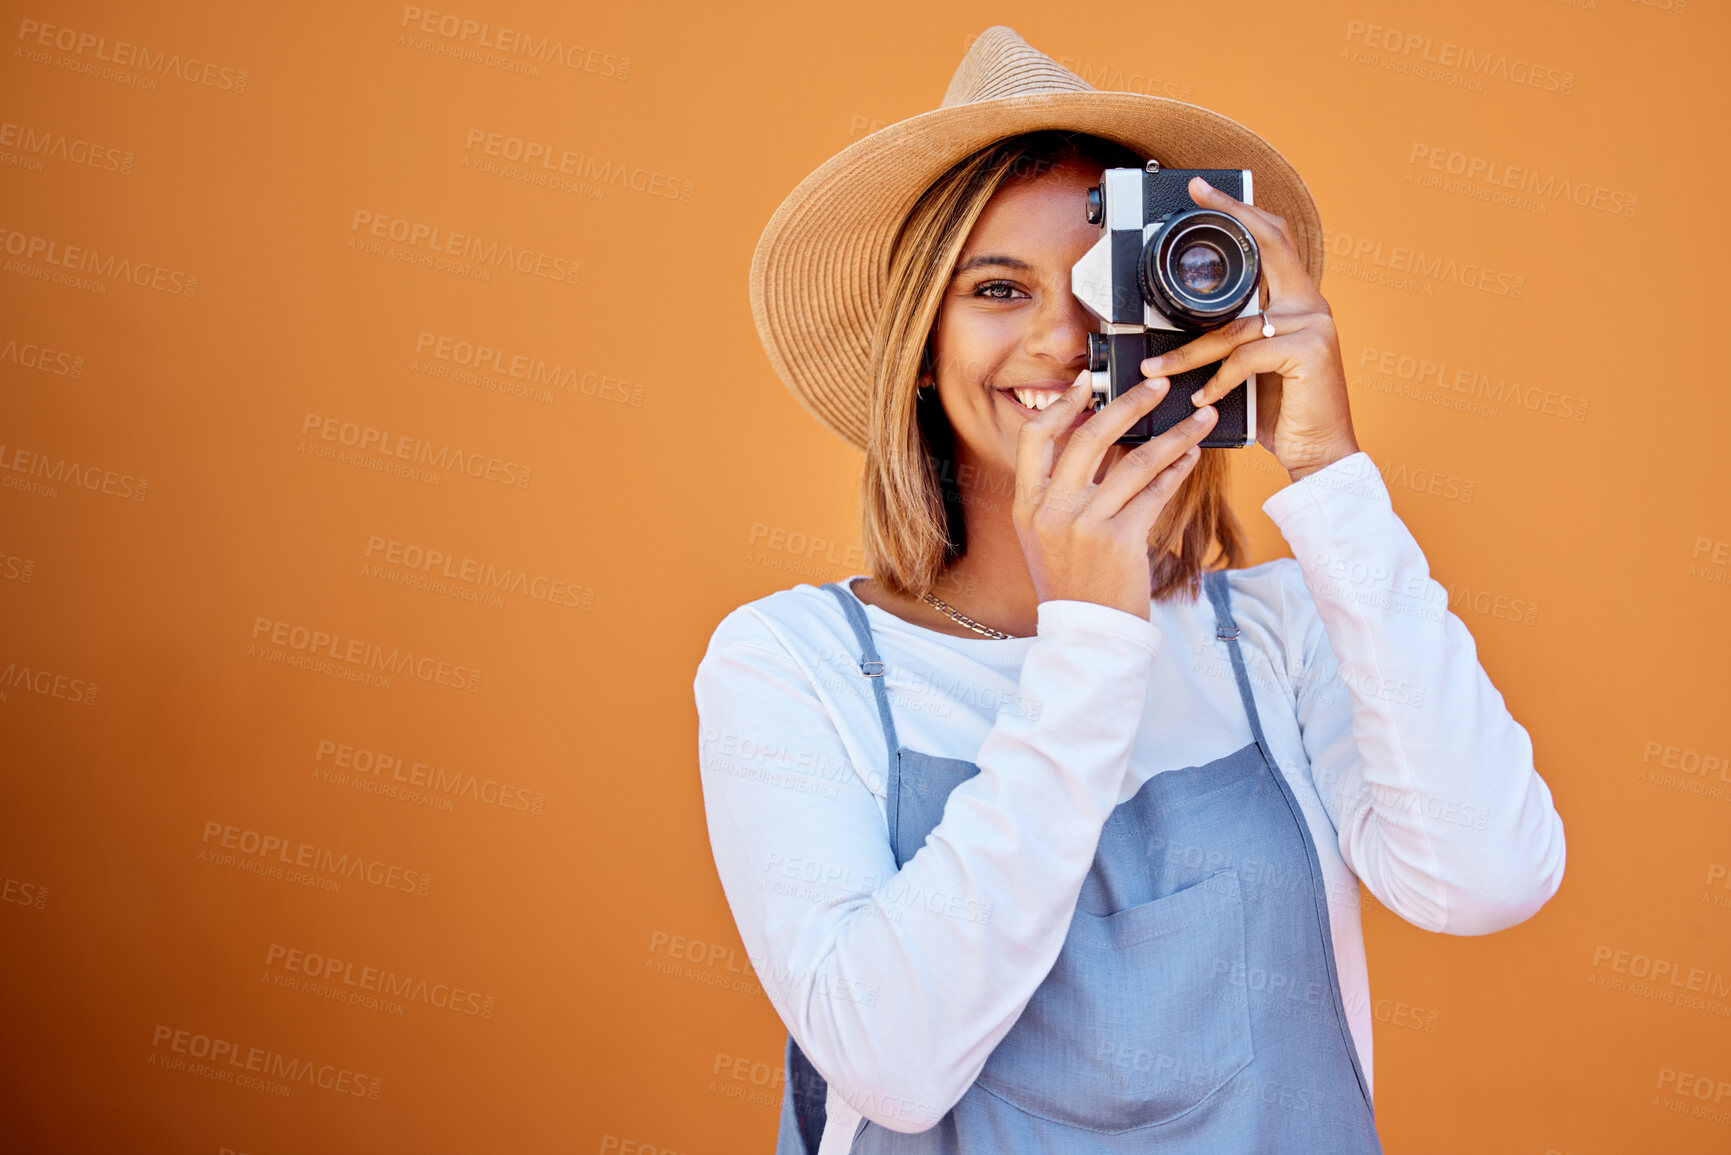 Buy stock photo Photographer, portrait and woman shooting a picture or photo with a retro camera isolated in an orange background. Happy, studio and female taking creative shots or fashion photographs as photography